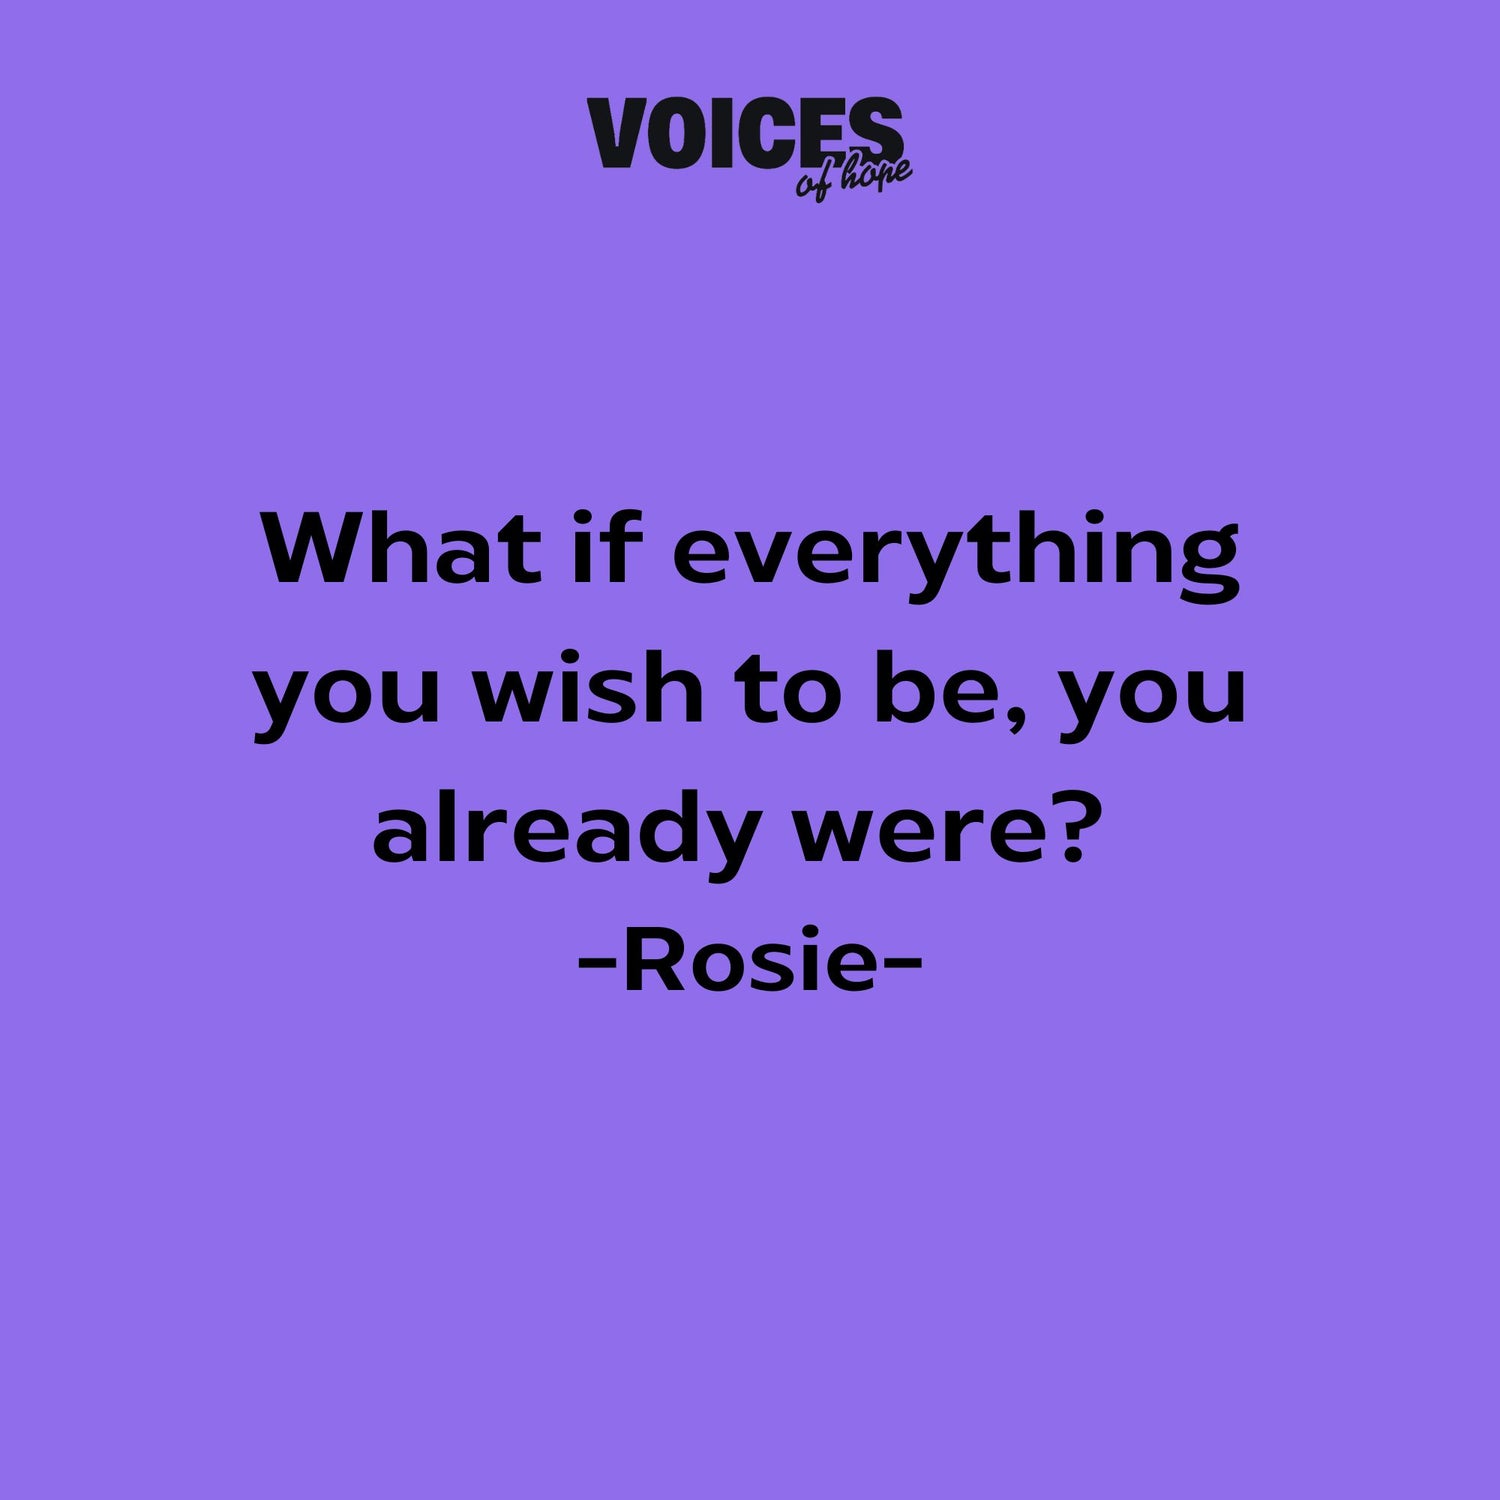 Purple background with black writing that reads: "what if everything you wish to be, you already were? Rosie."